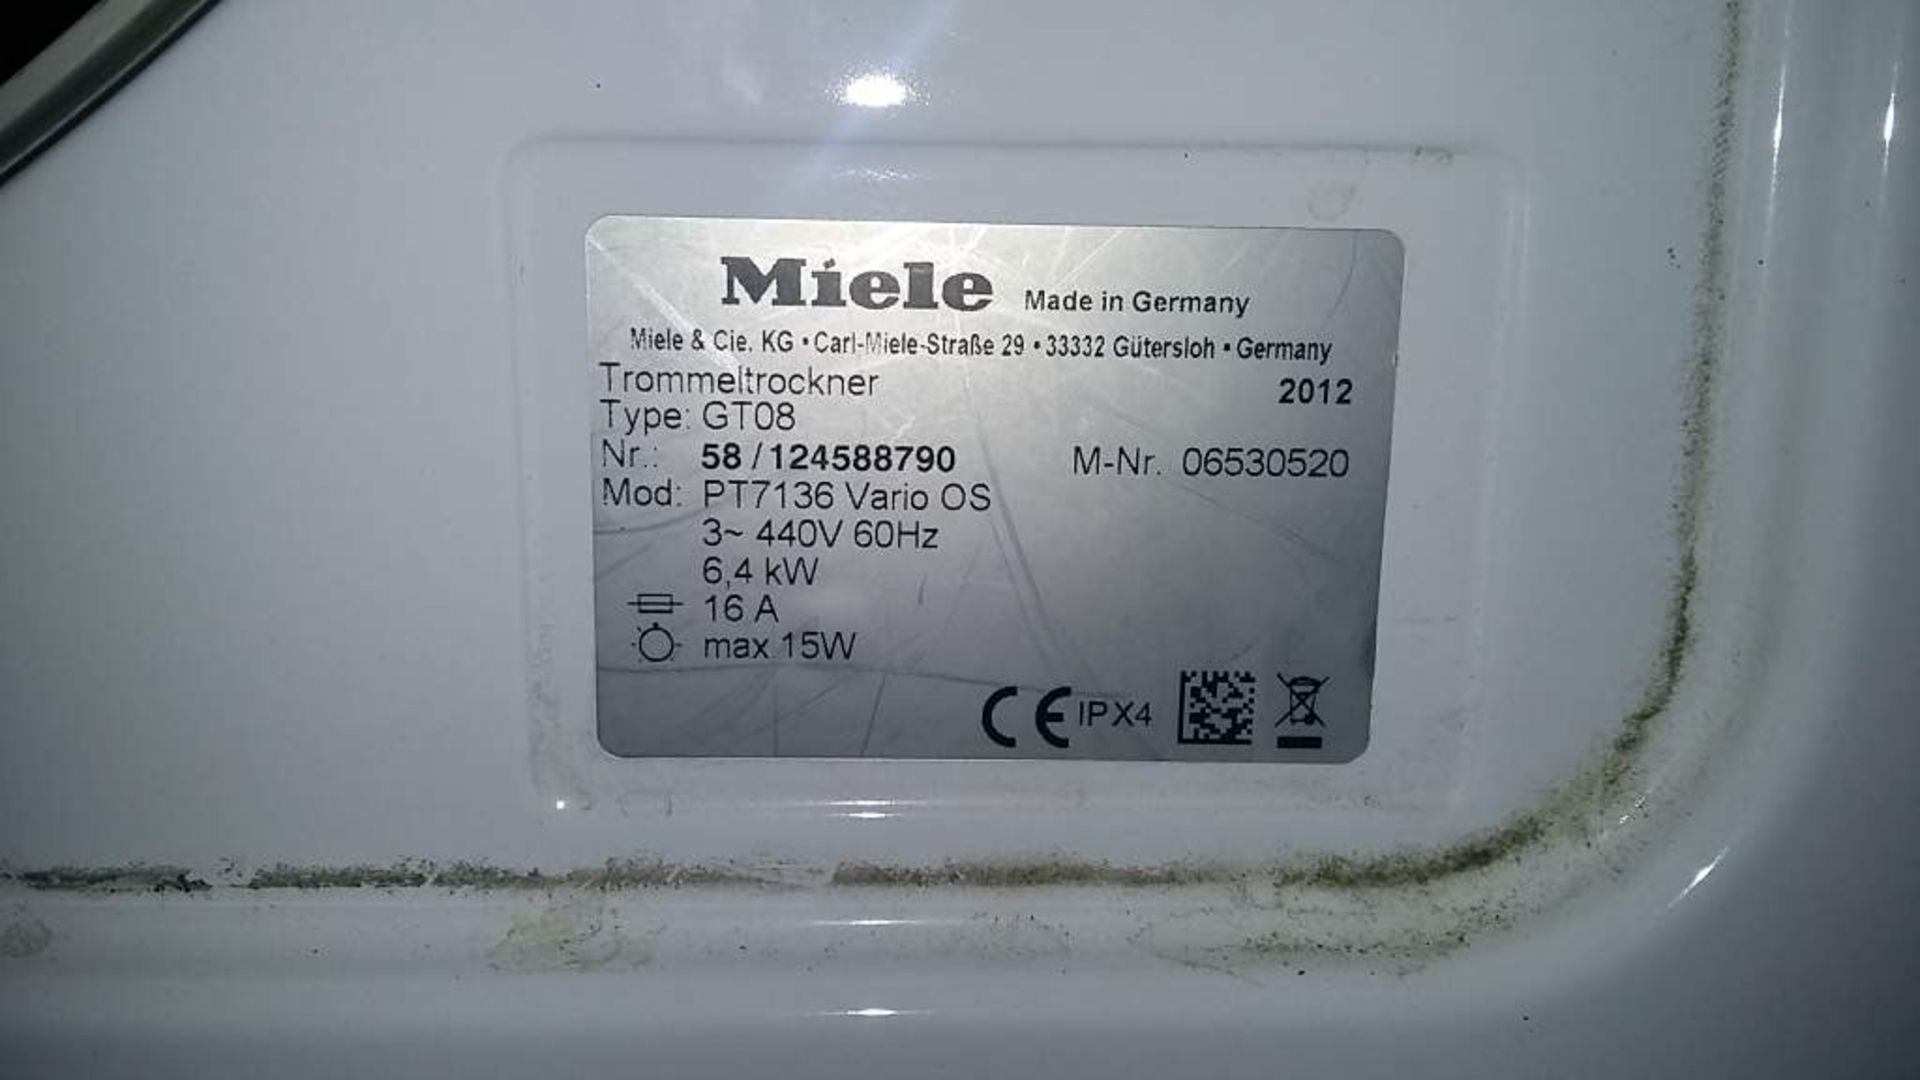 Miele professional tumble dryer - PT7136 - Image 3 of 3